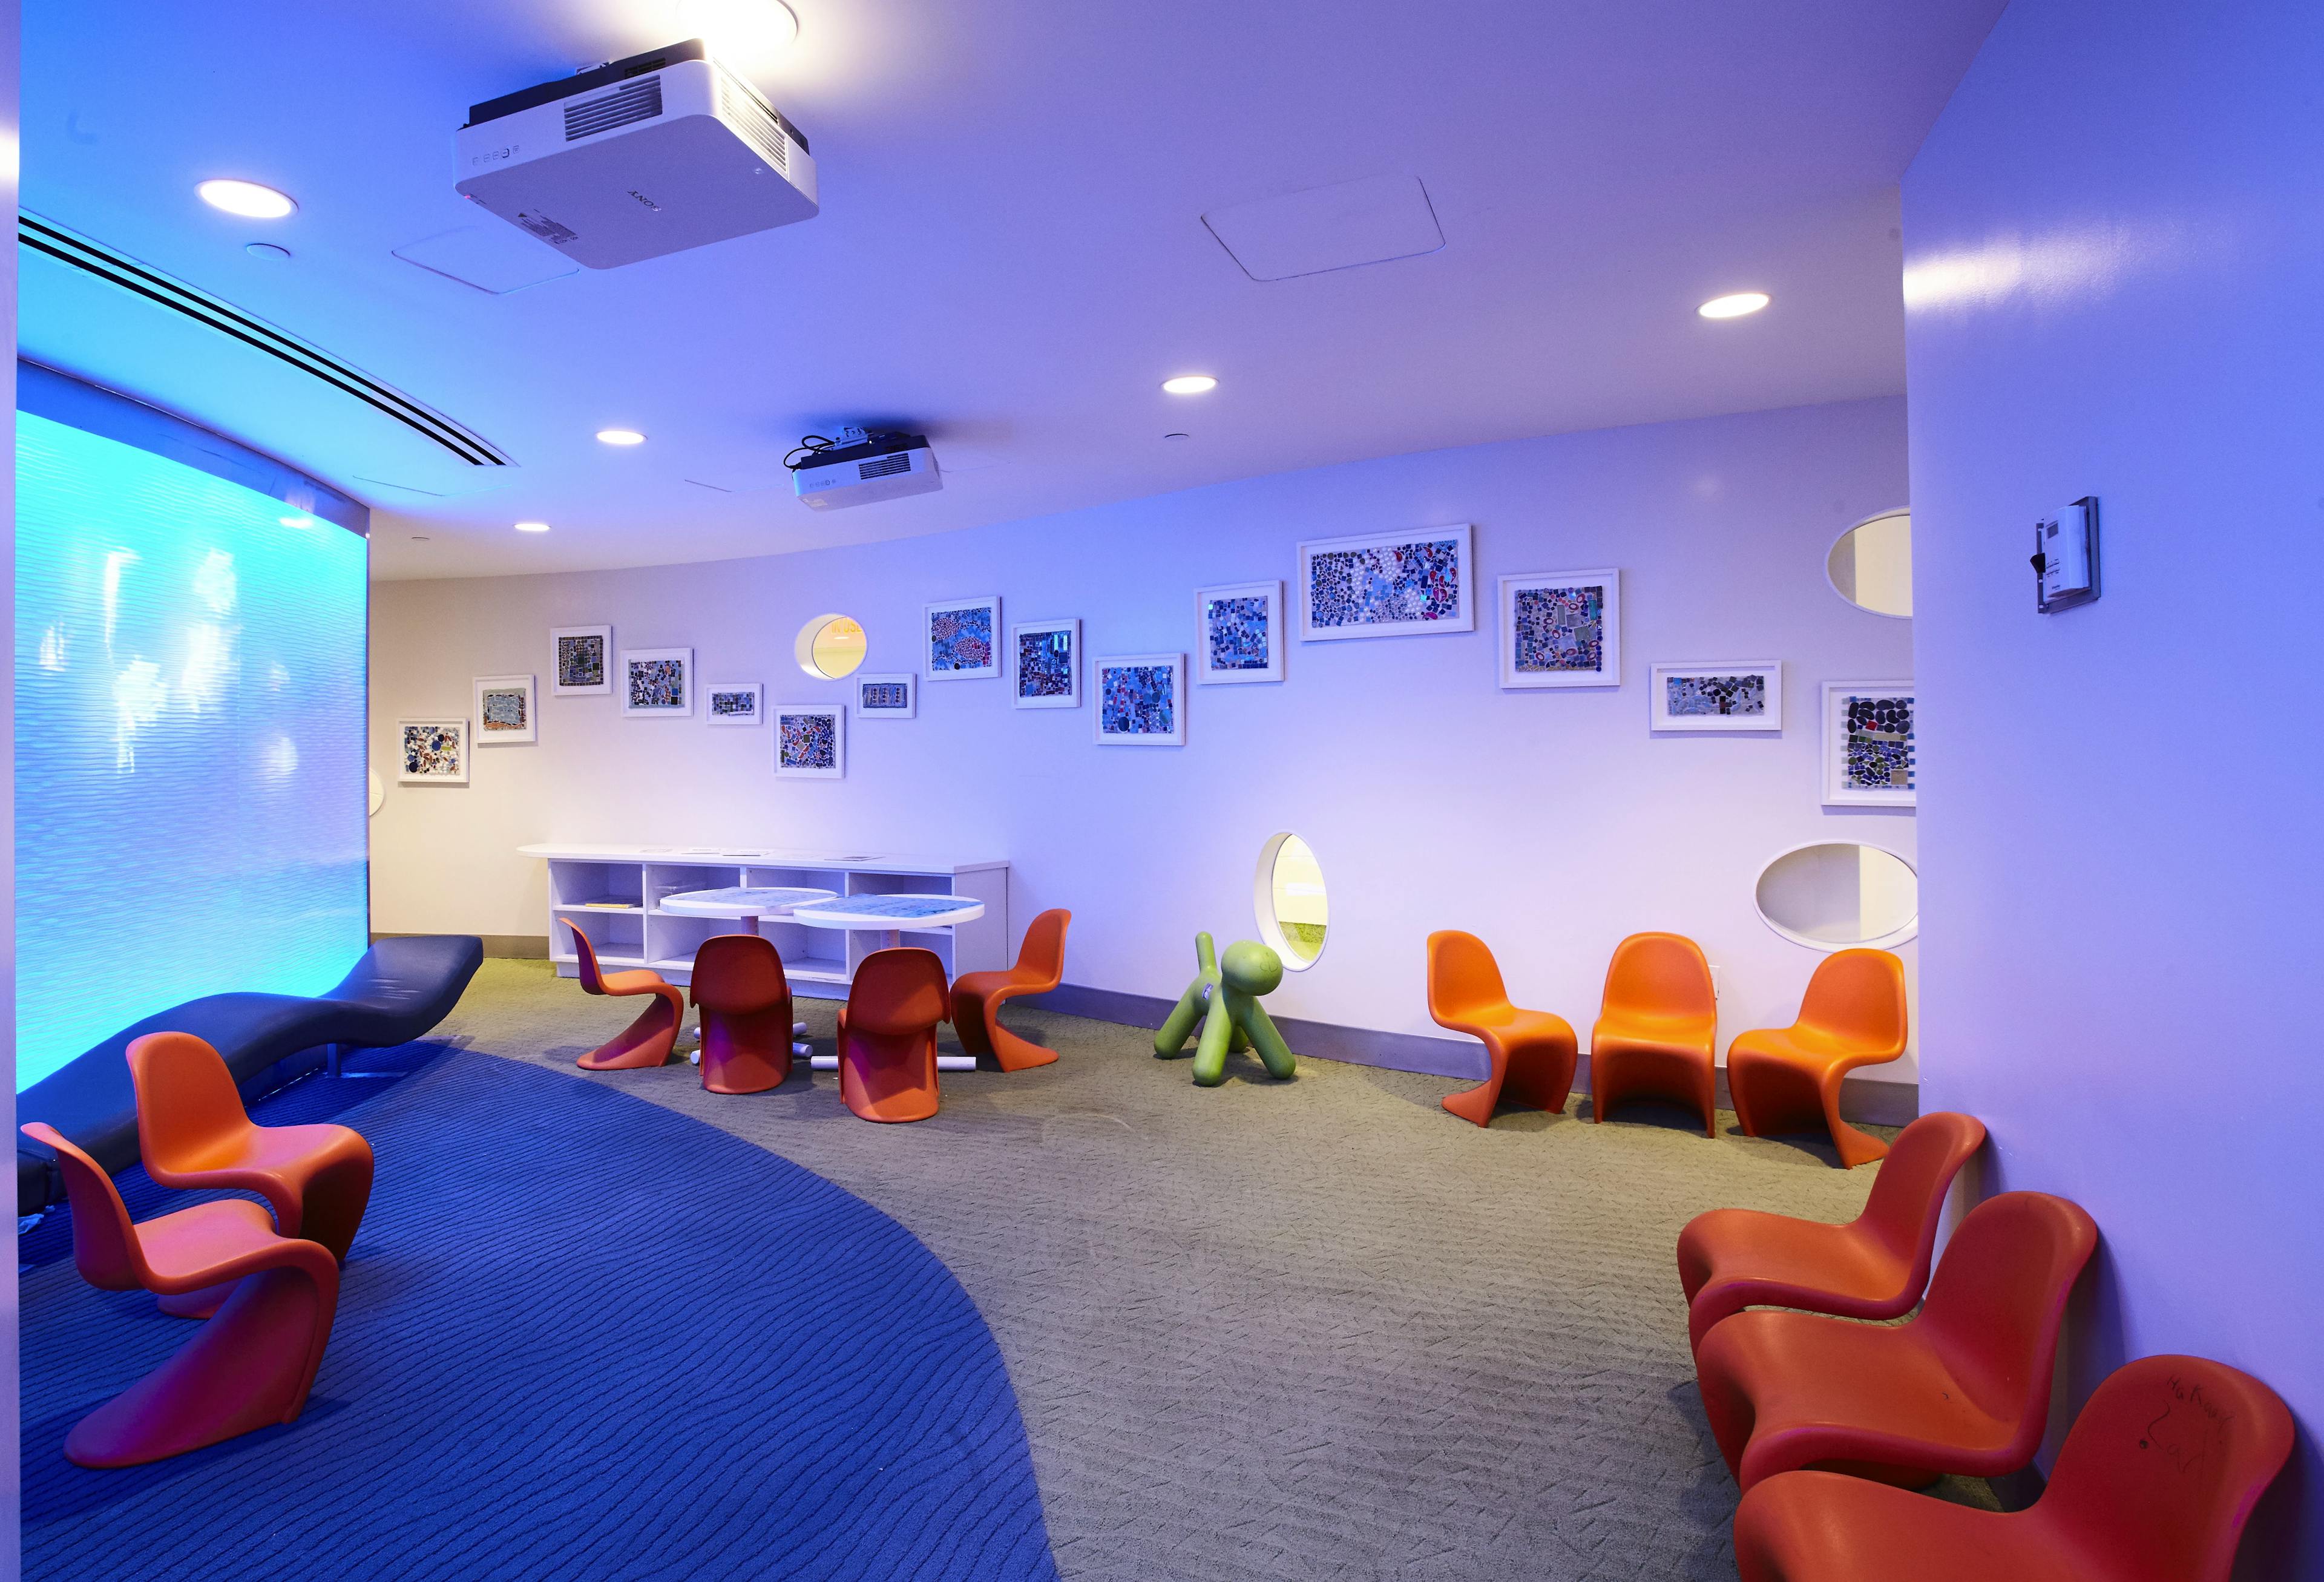 Children's lounge area at a hospital with rows of modern orange chairs and a gallery wall of framed artwork.